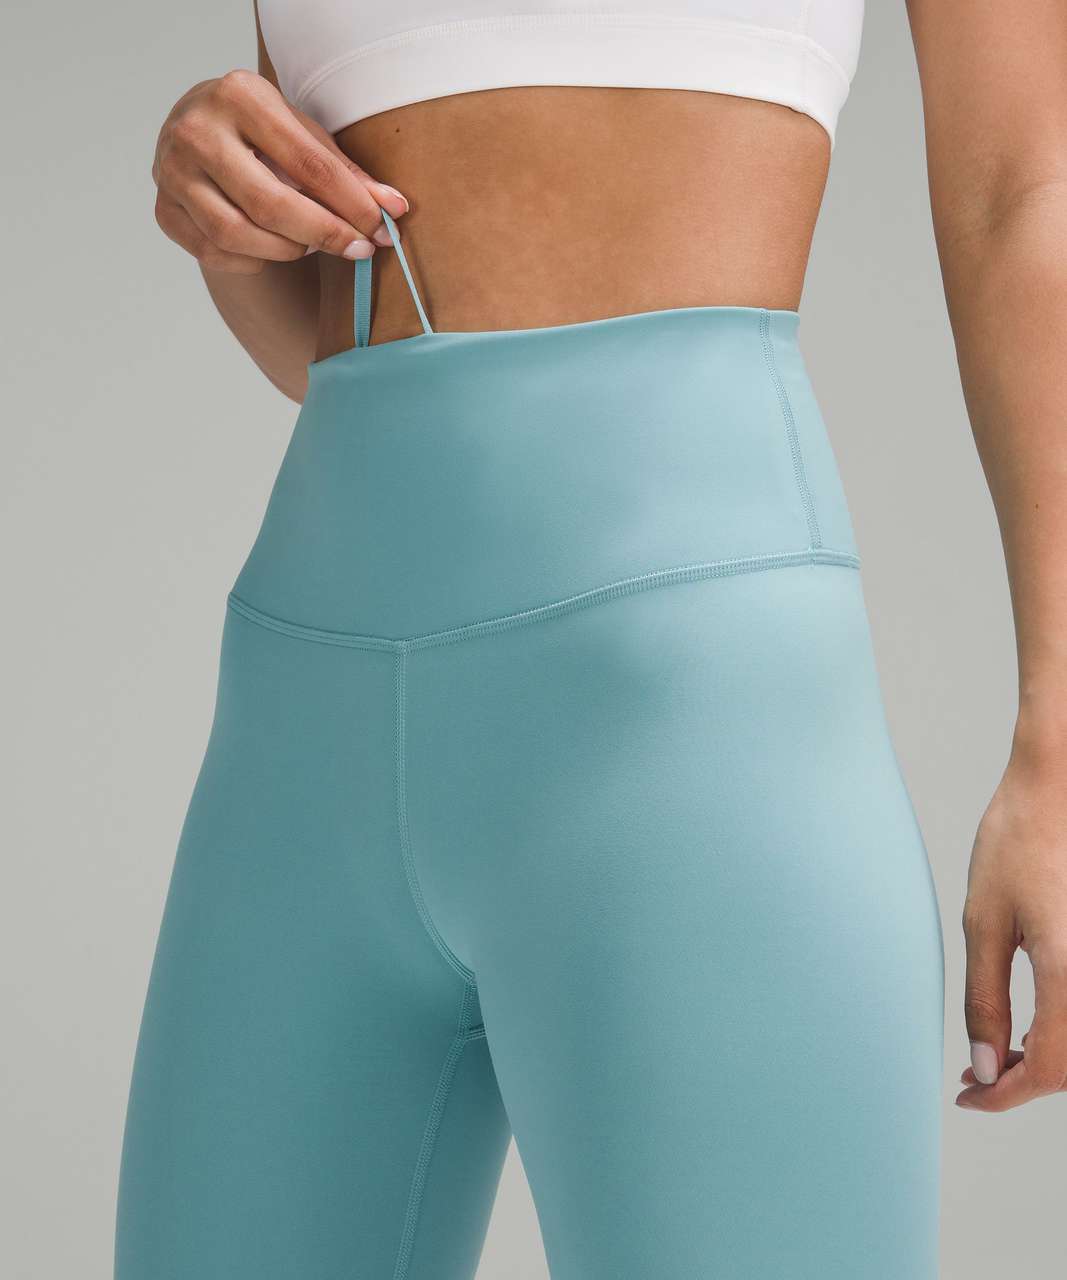 Lululemon Wunder Train High-Rise Tight 28 Storm Teal Size 8 MSRP $98.00  *NWT*